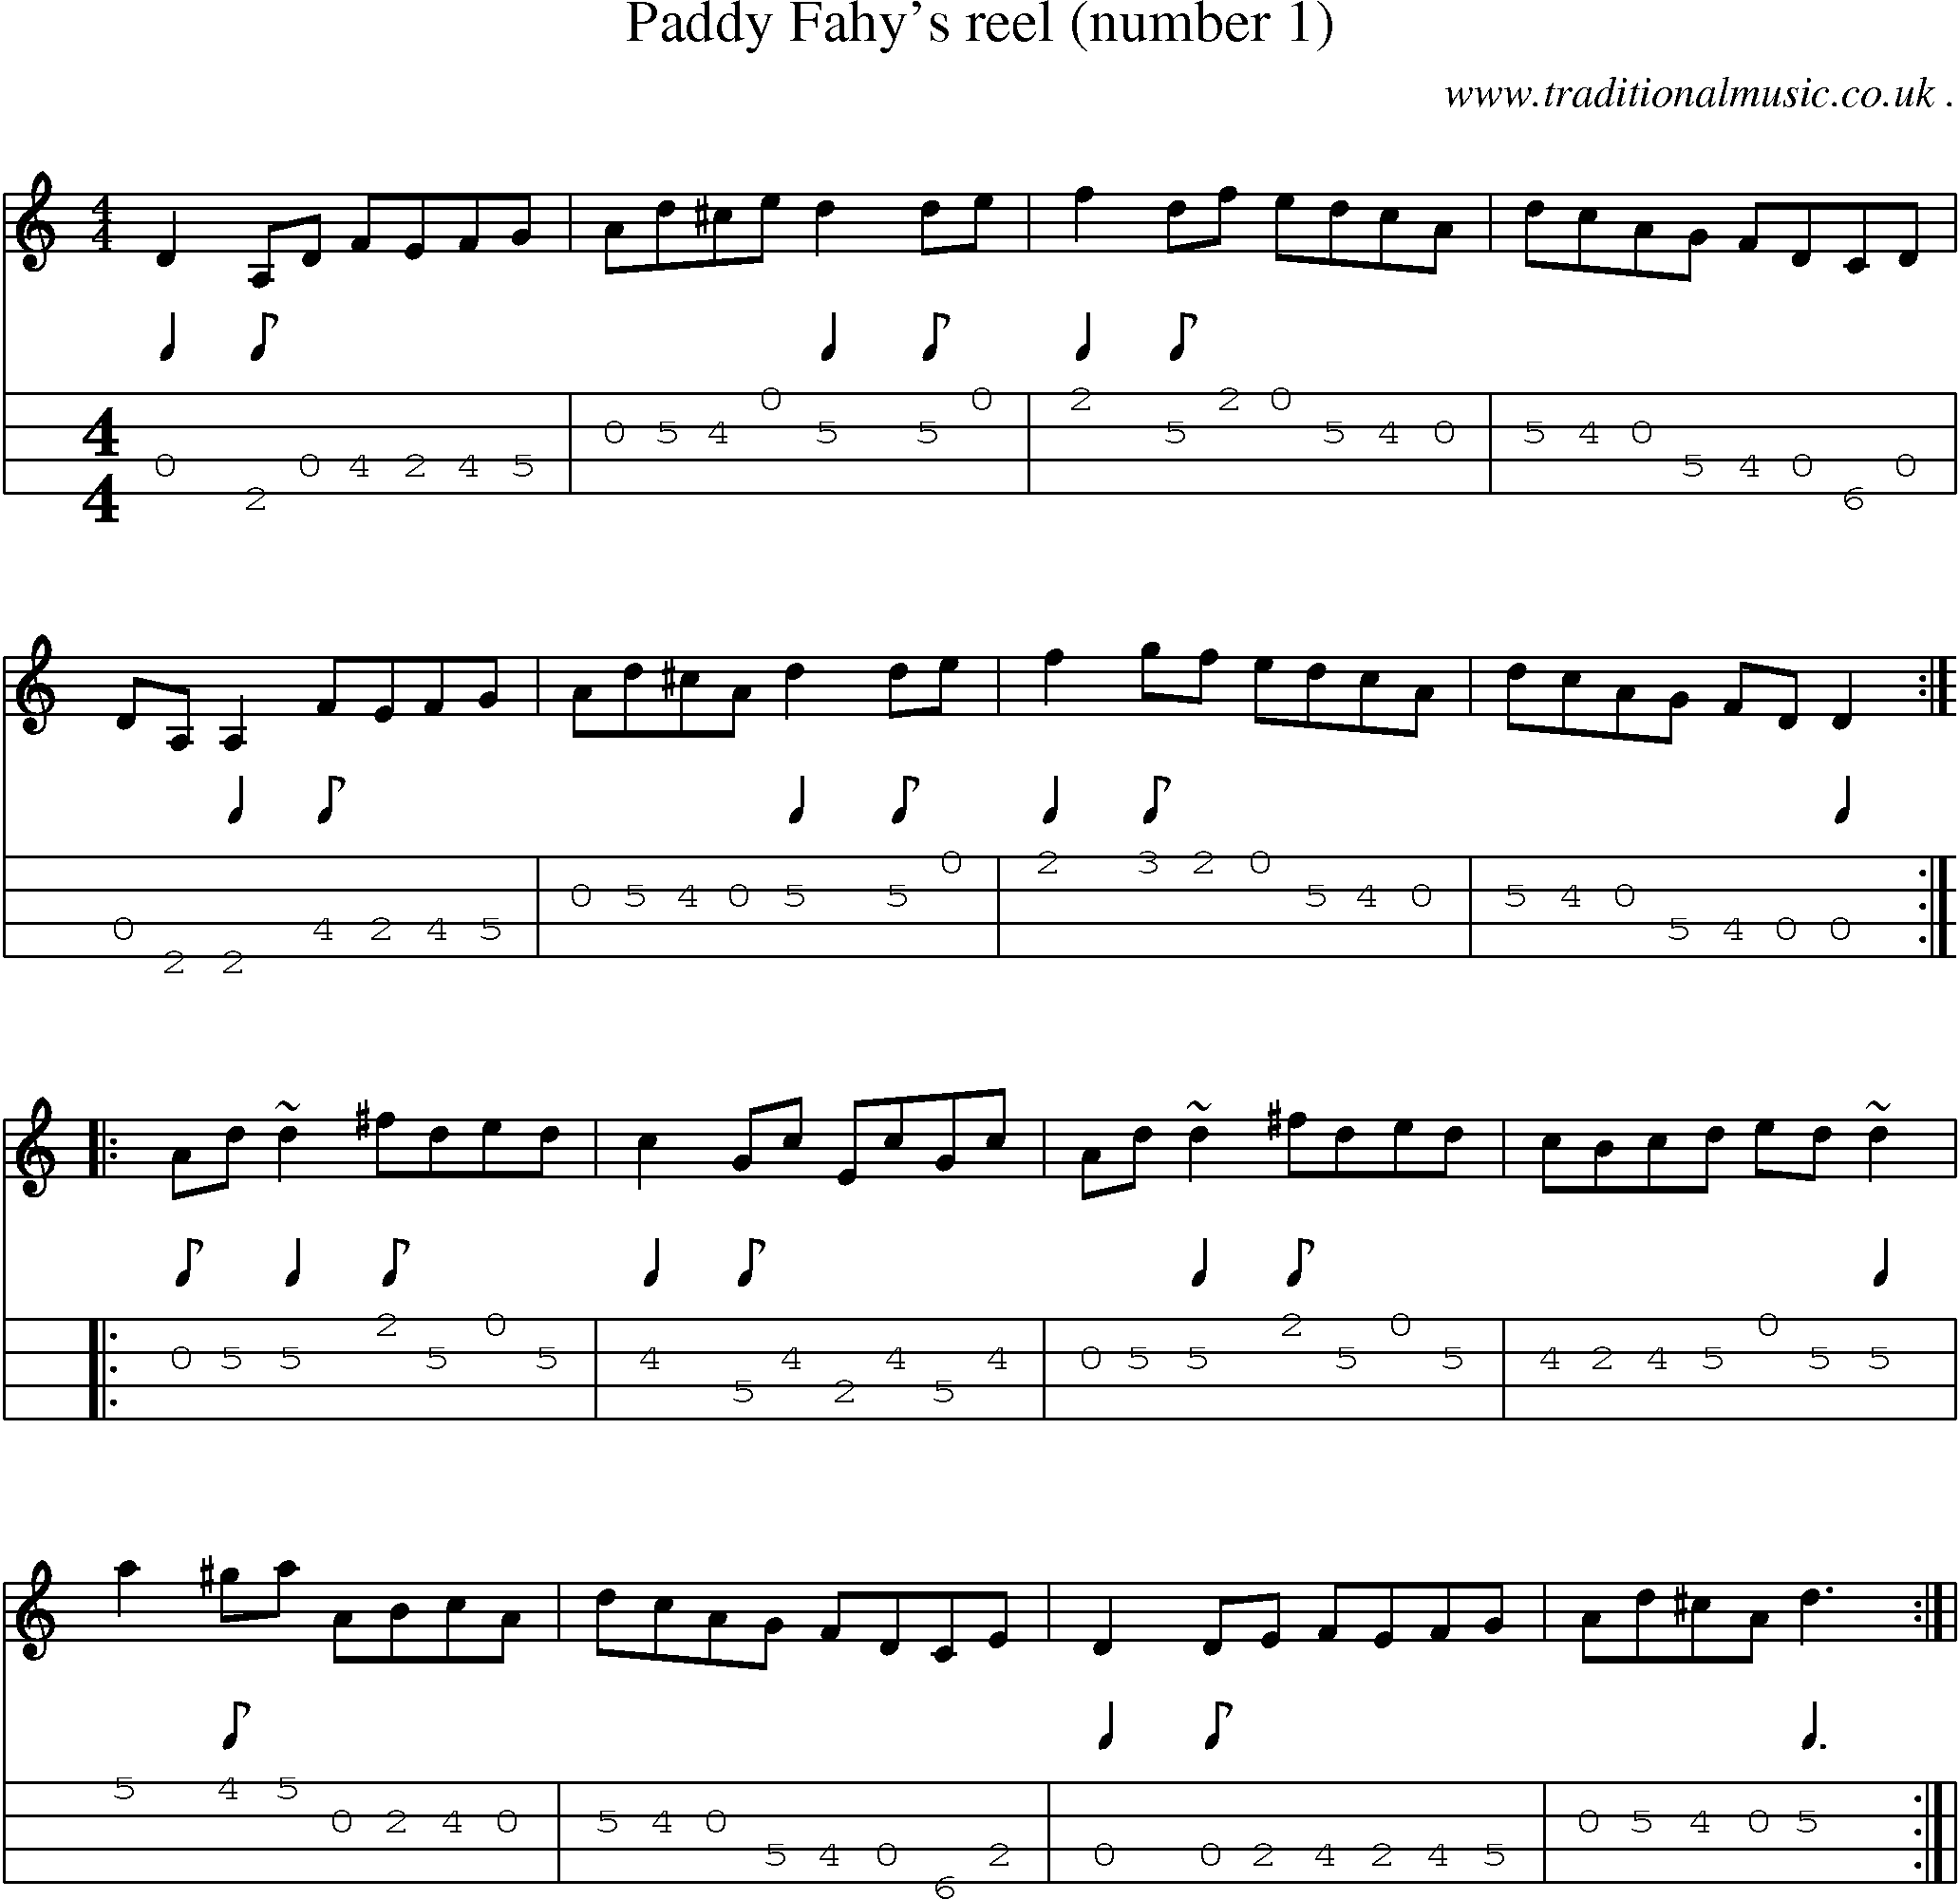 Sheet-music  score, Chords and Mandolin Tabs for Paddy Fahys Reel Number 1